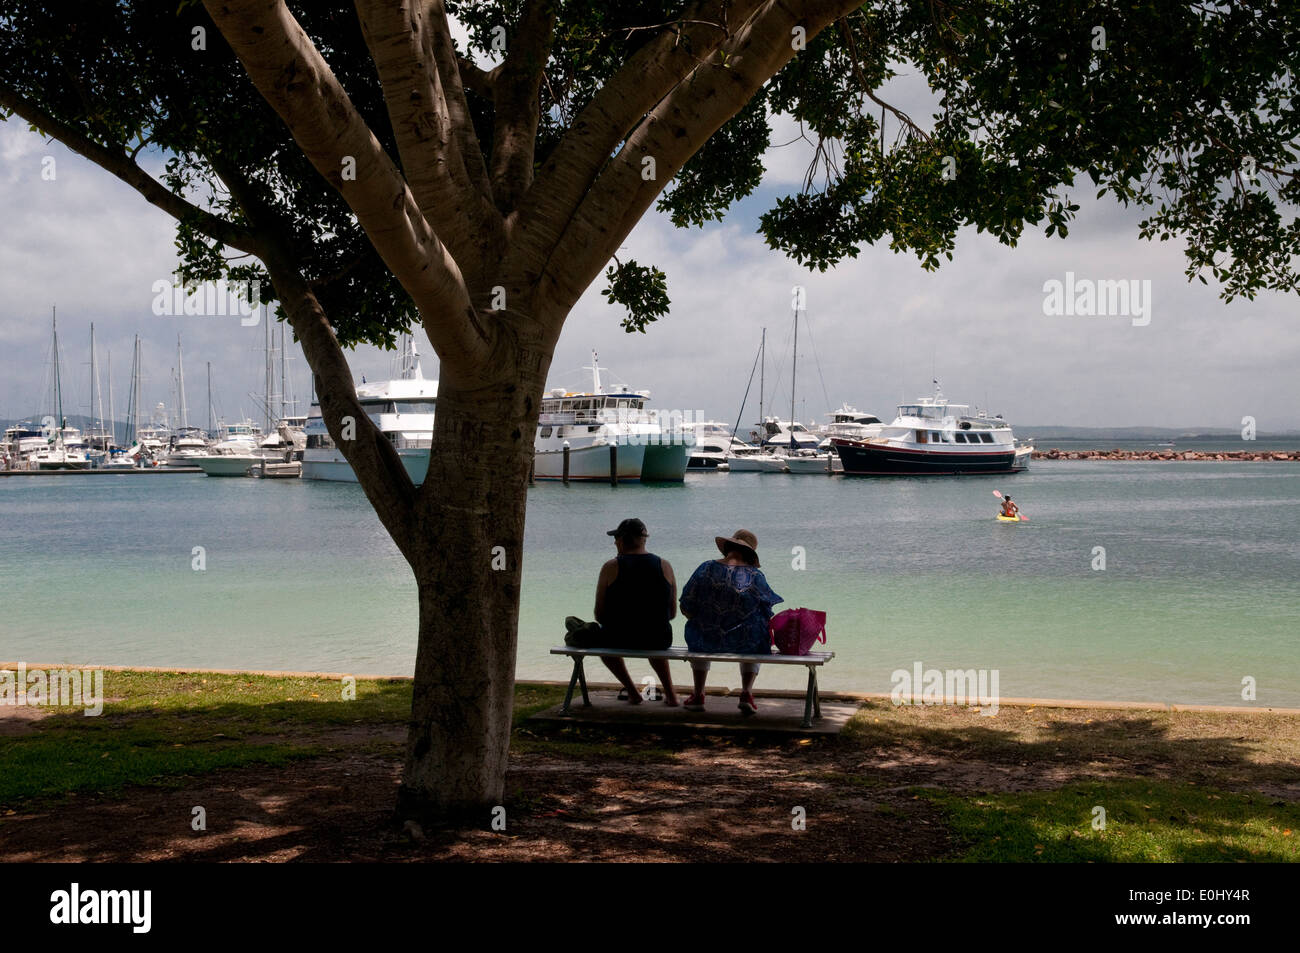 A couple sit in the shade of a tree overlooking the marina at Nelson Bay, Port Stephens, New South Wales, Australia. Stock Photo